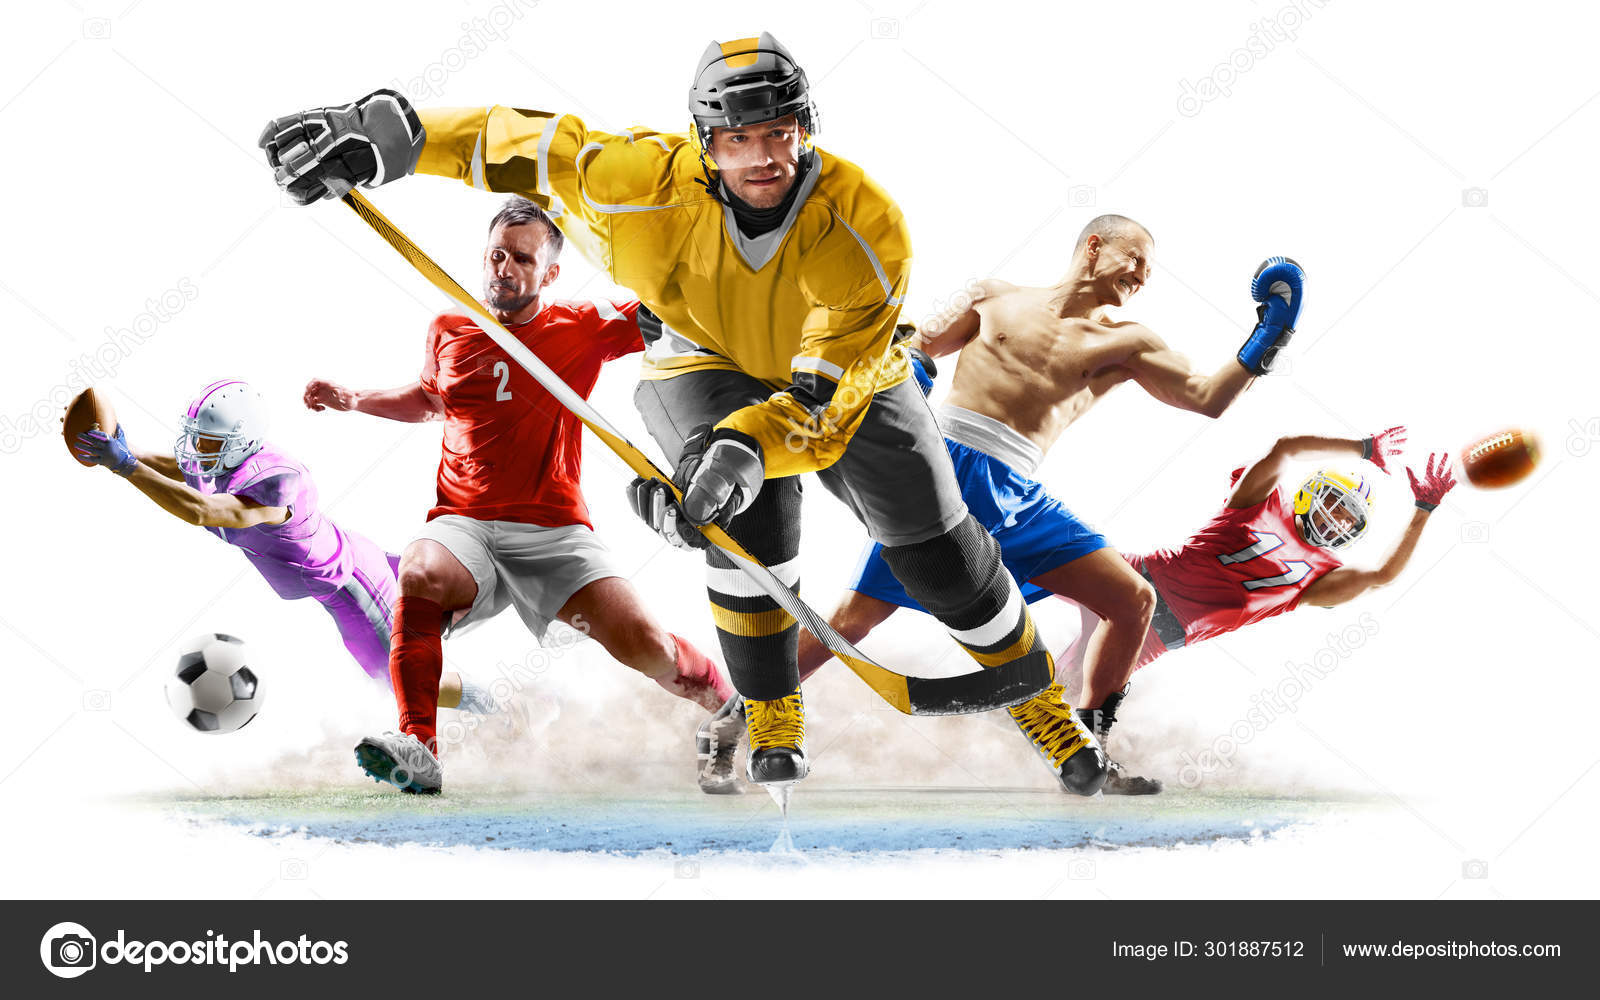 16 992 Multi Sport Stock Photos Images Download Multi Sport Pictures On Depositphotos